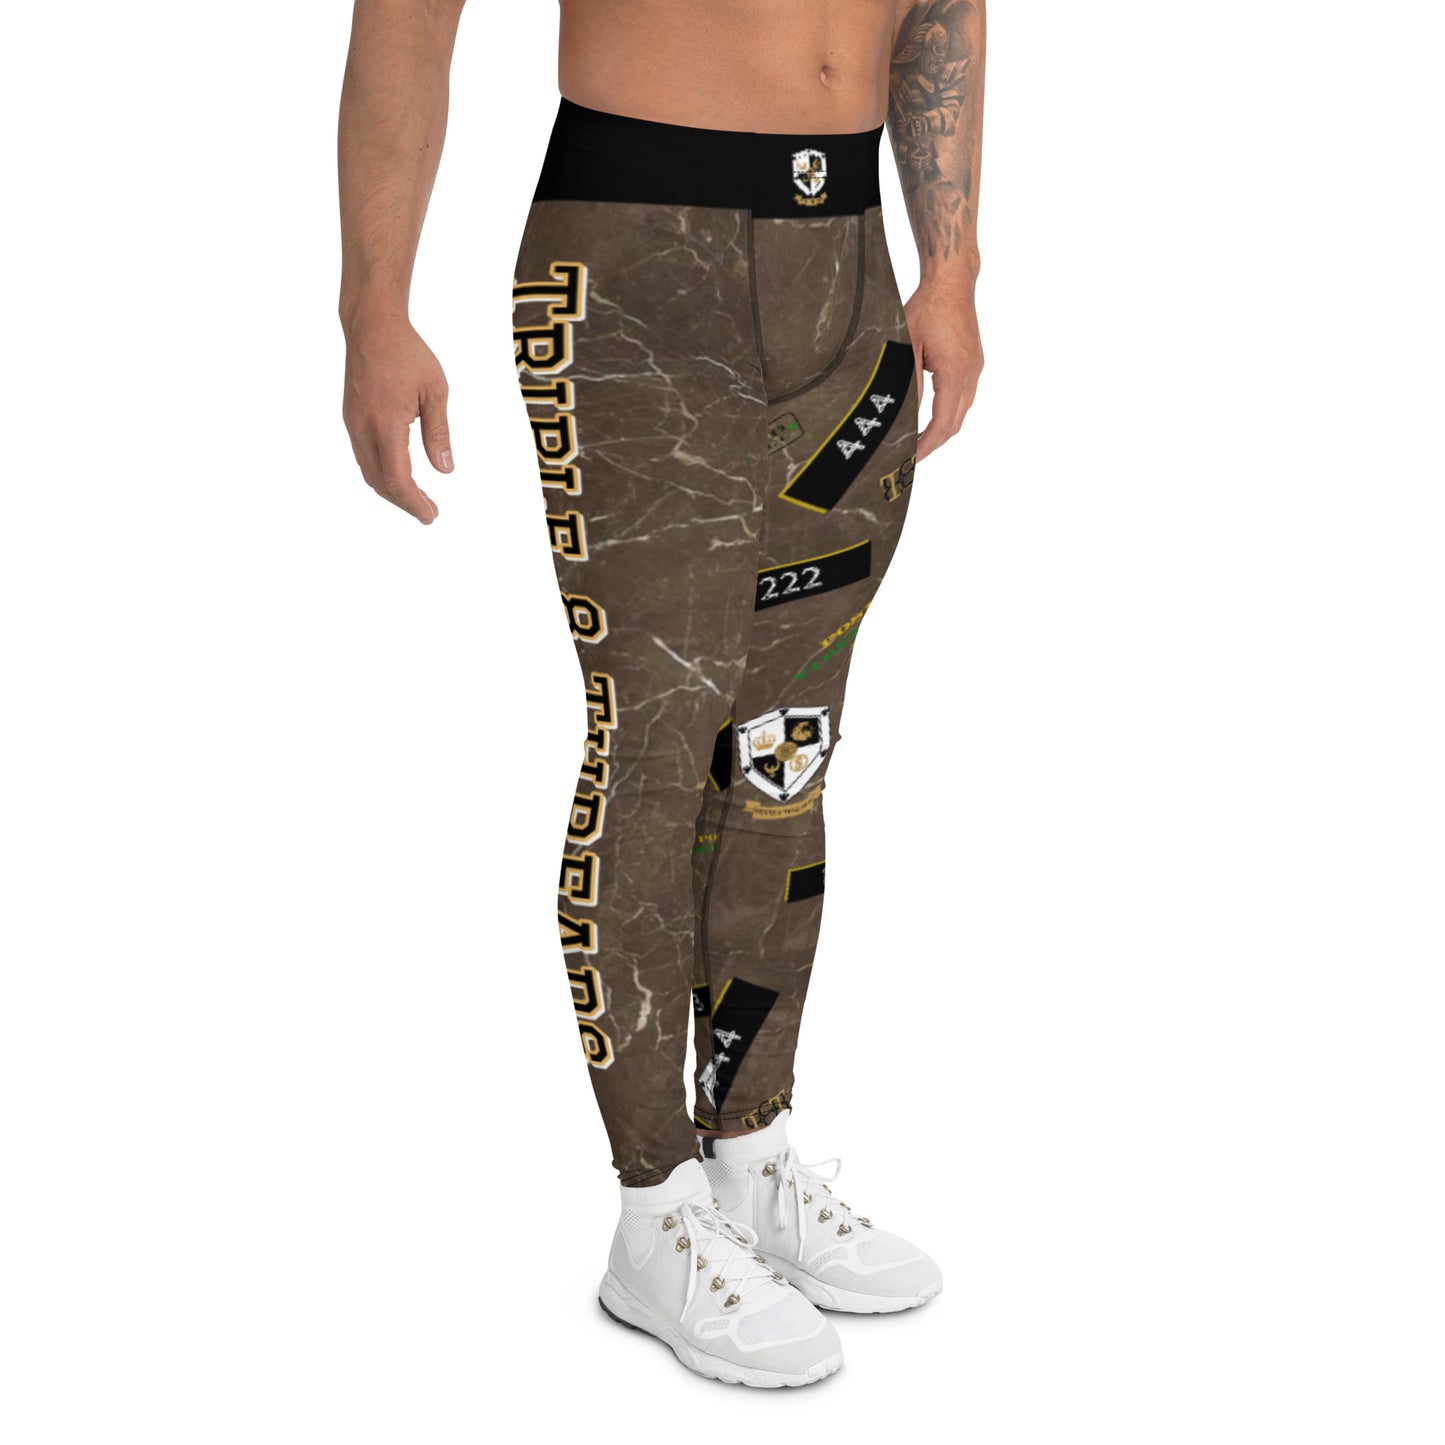 8xquiZit Collection - Men's Marble Coco-cured  Leggings